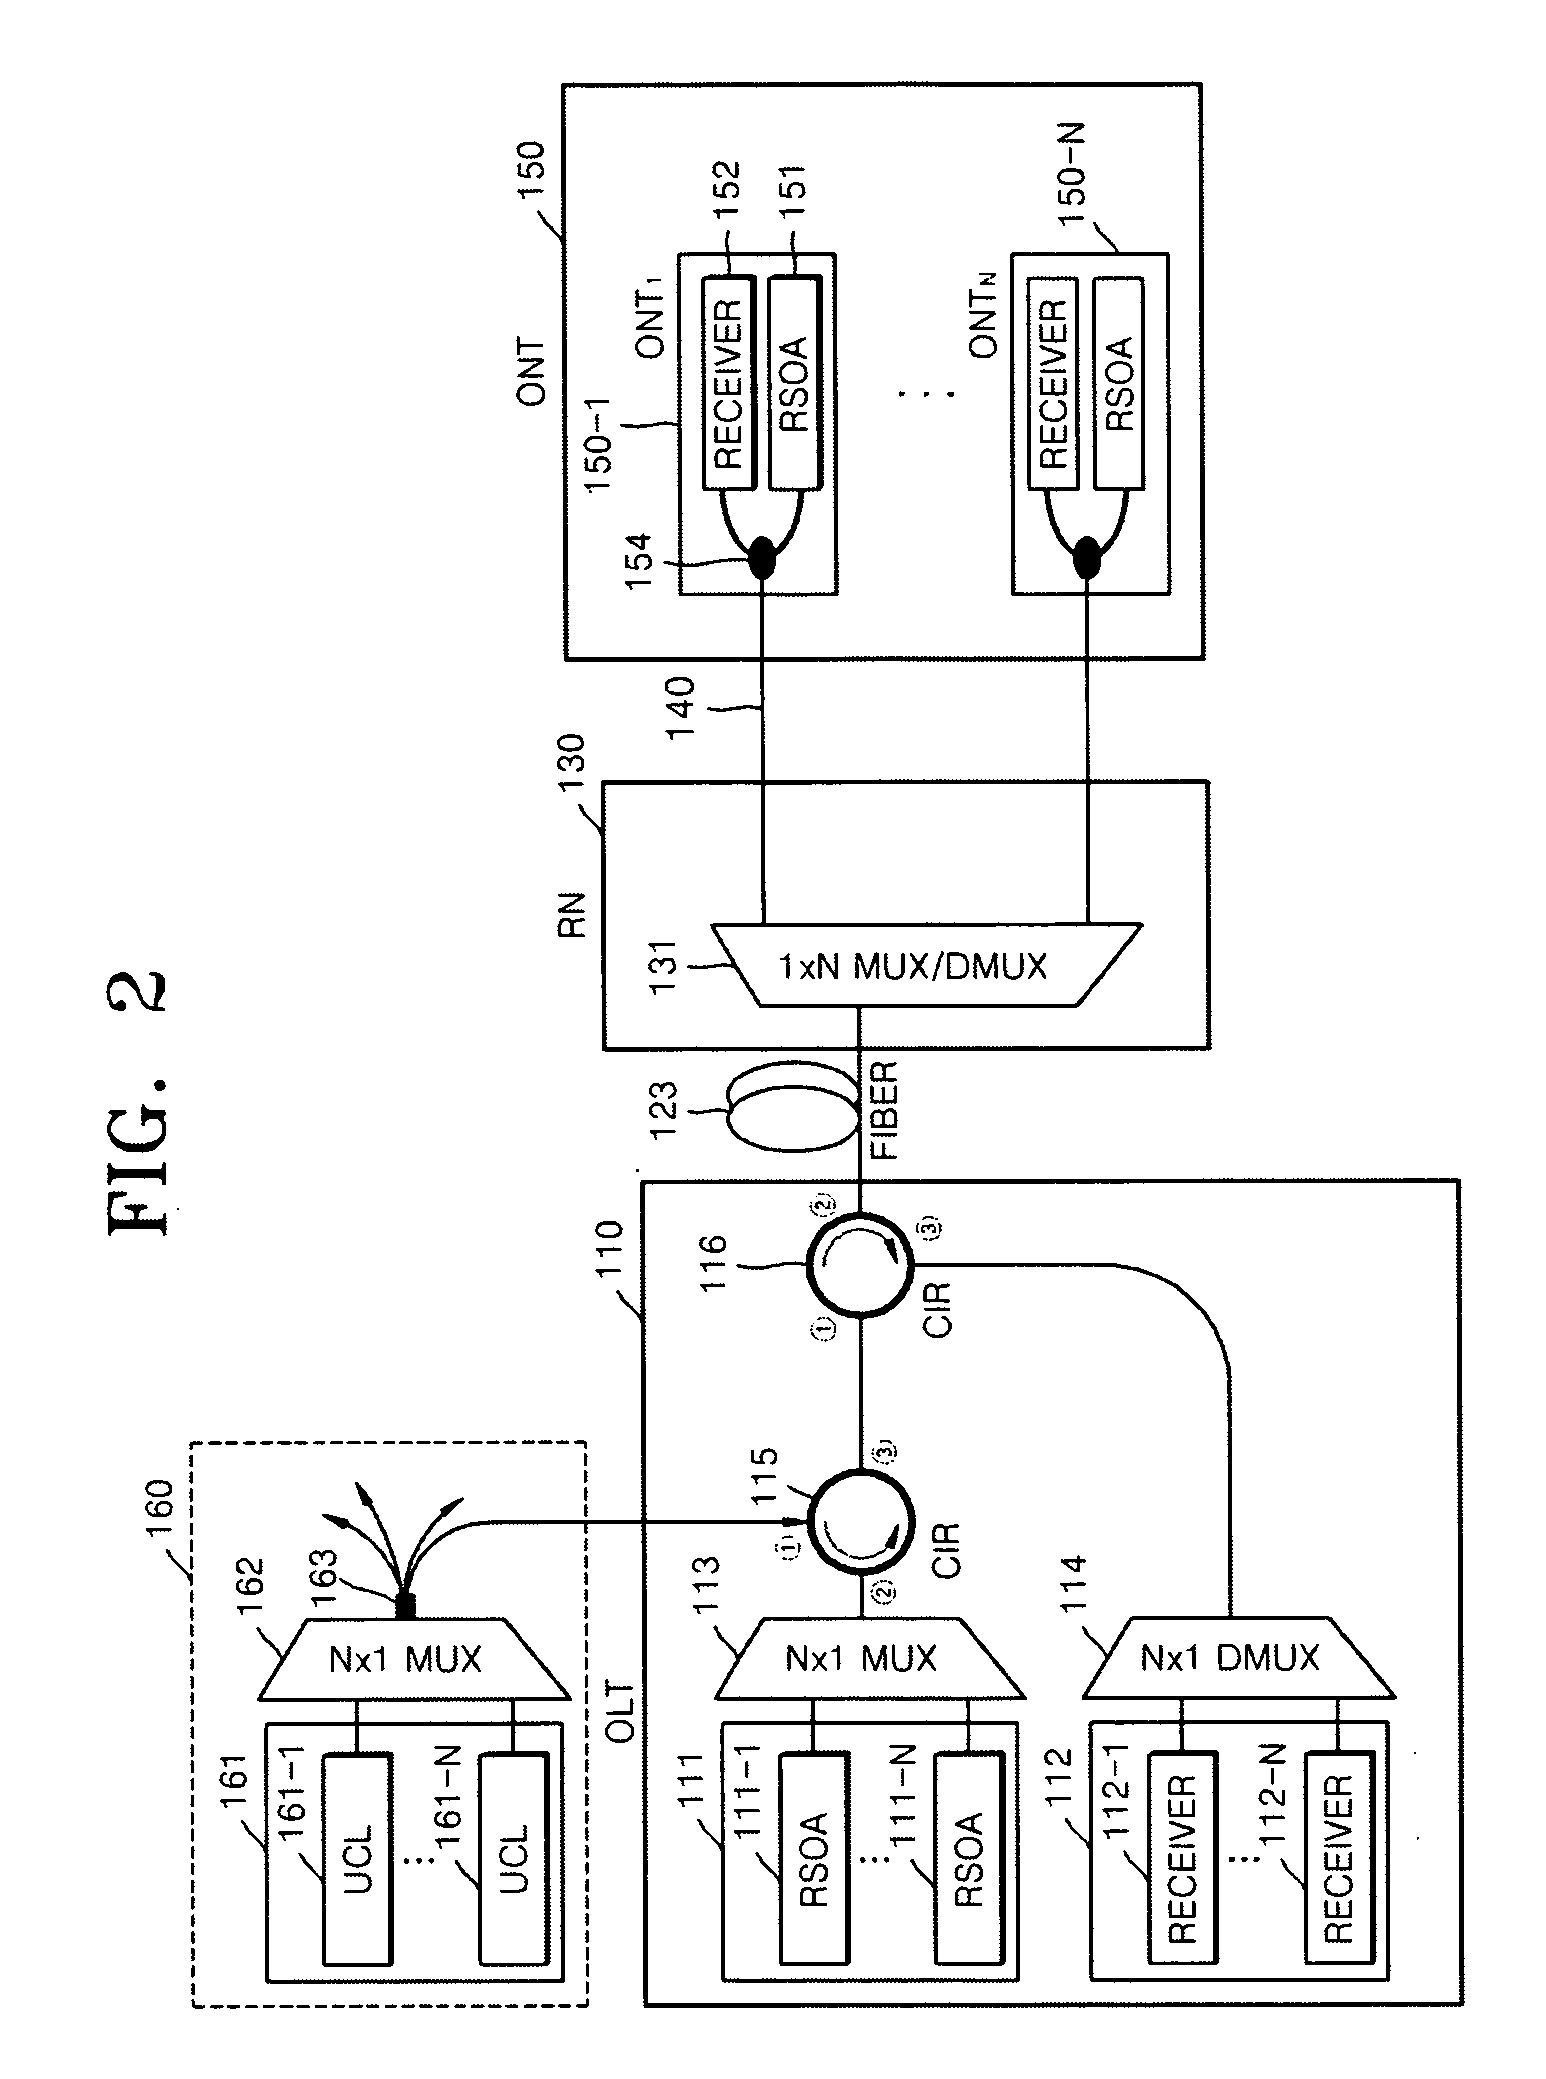 Passive Optical Network Based On Reflective Semiconductor Optical Amplifier